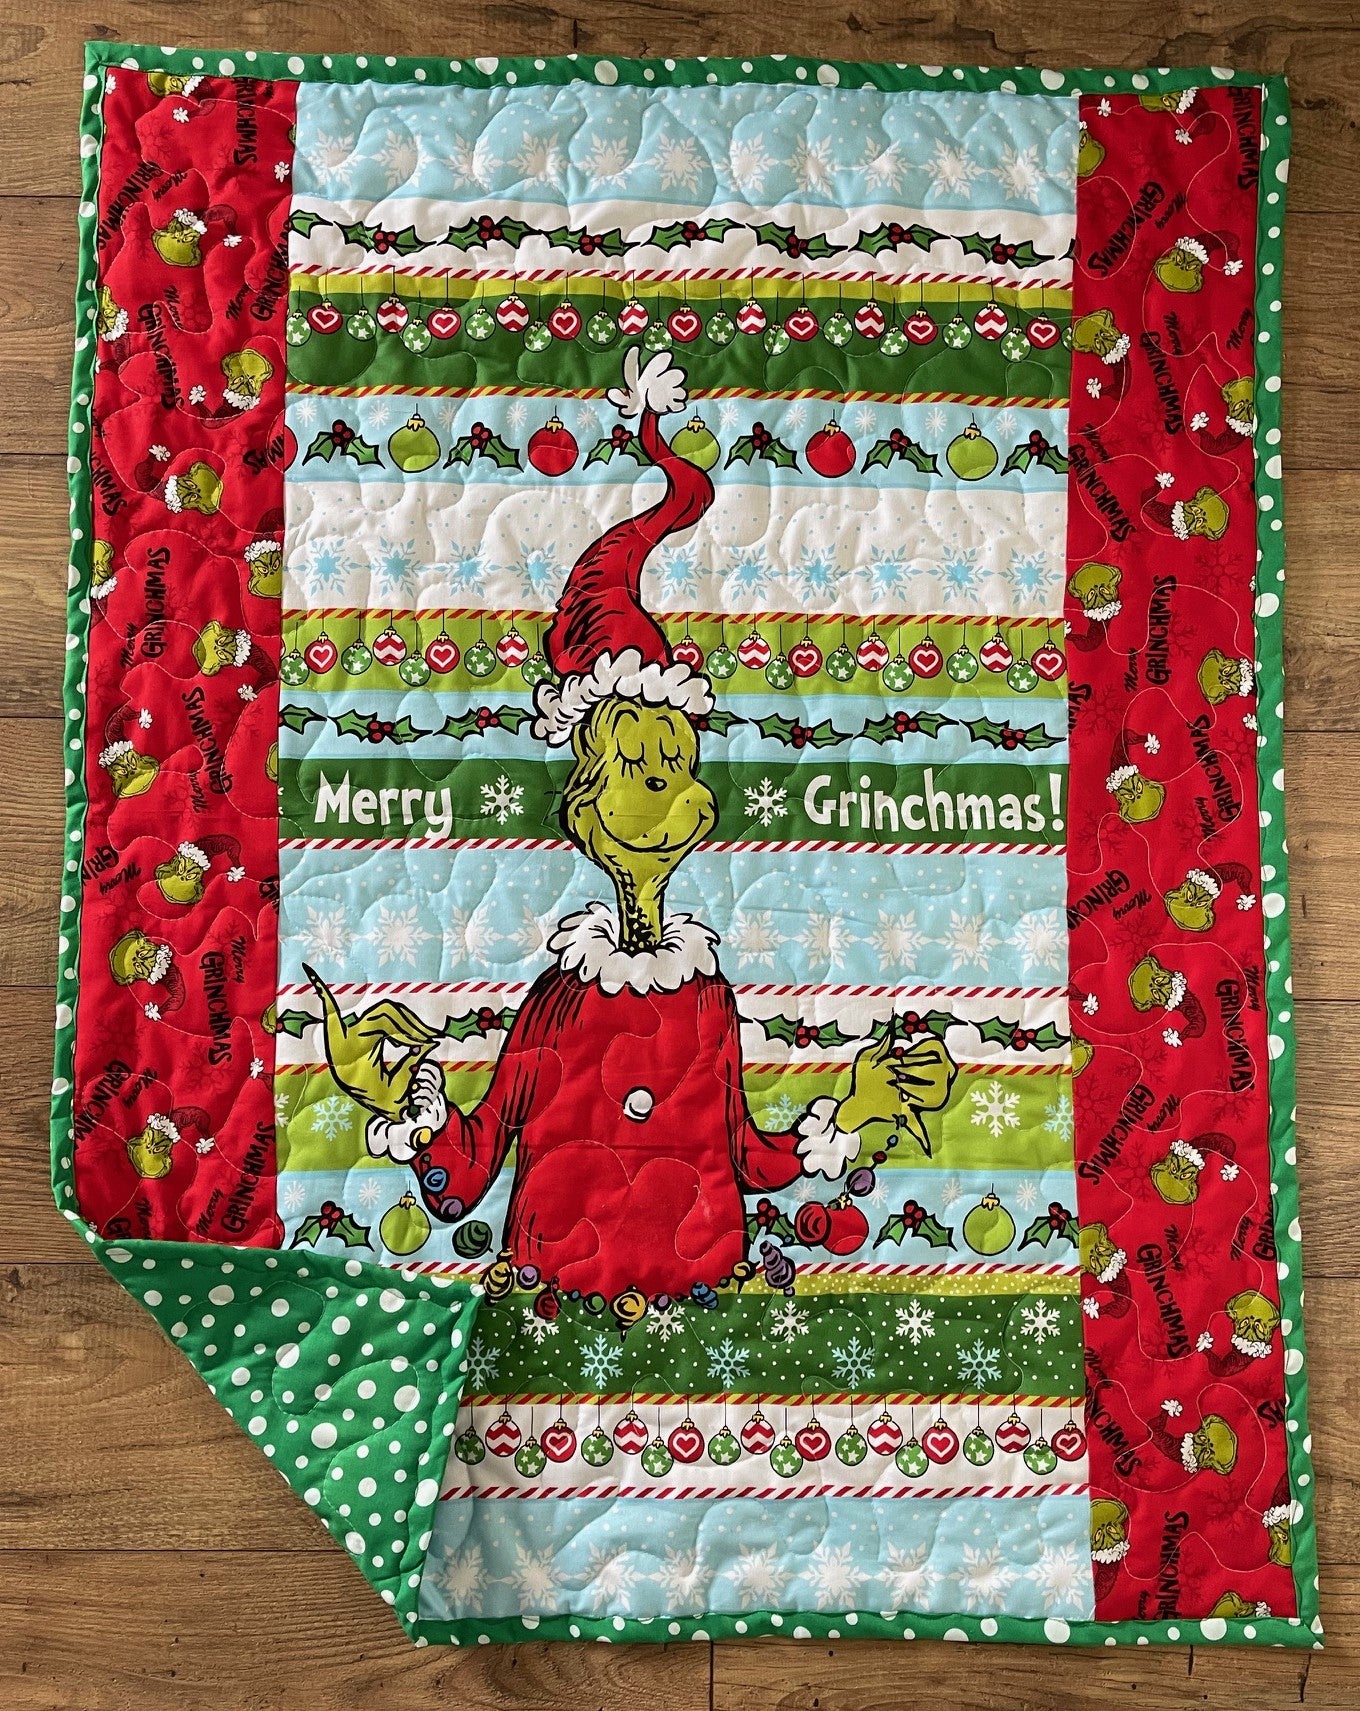 HOW THE GRINCH STOLE CHRISTMAS Inspired Quilted Blanket MERRY GRINCHMAS!